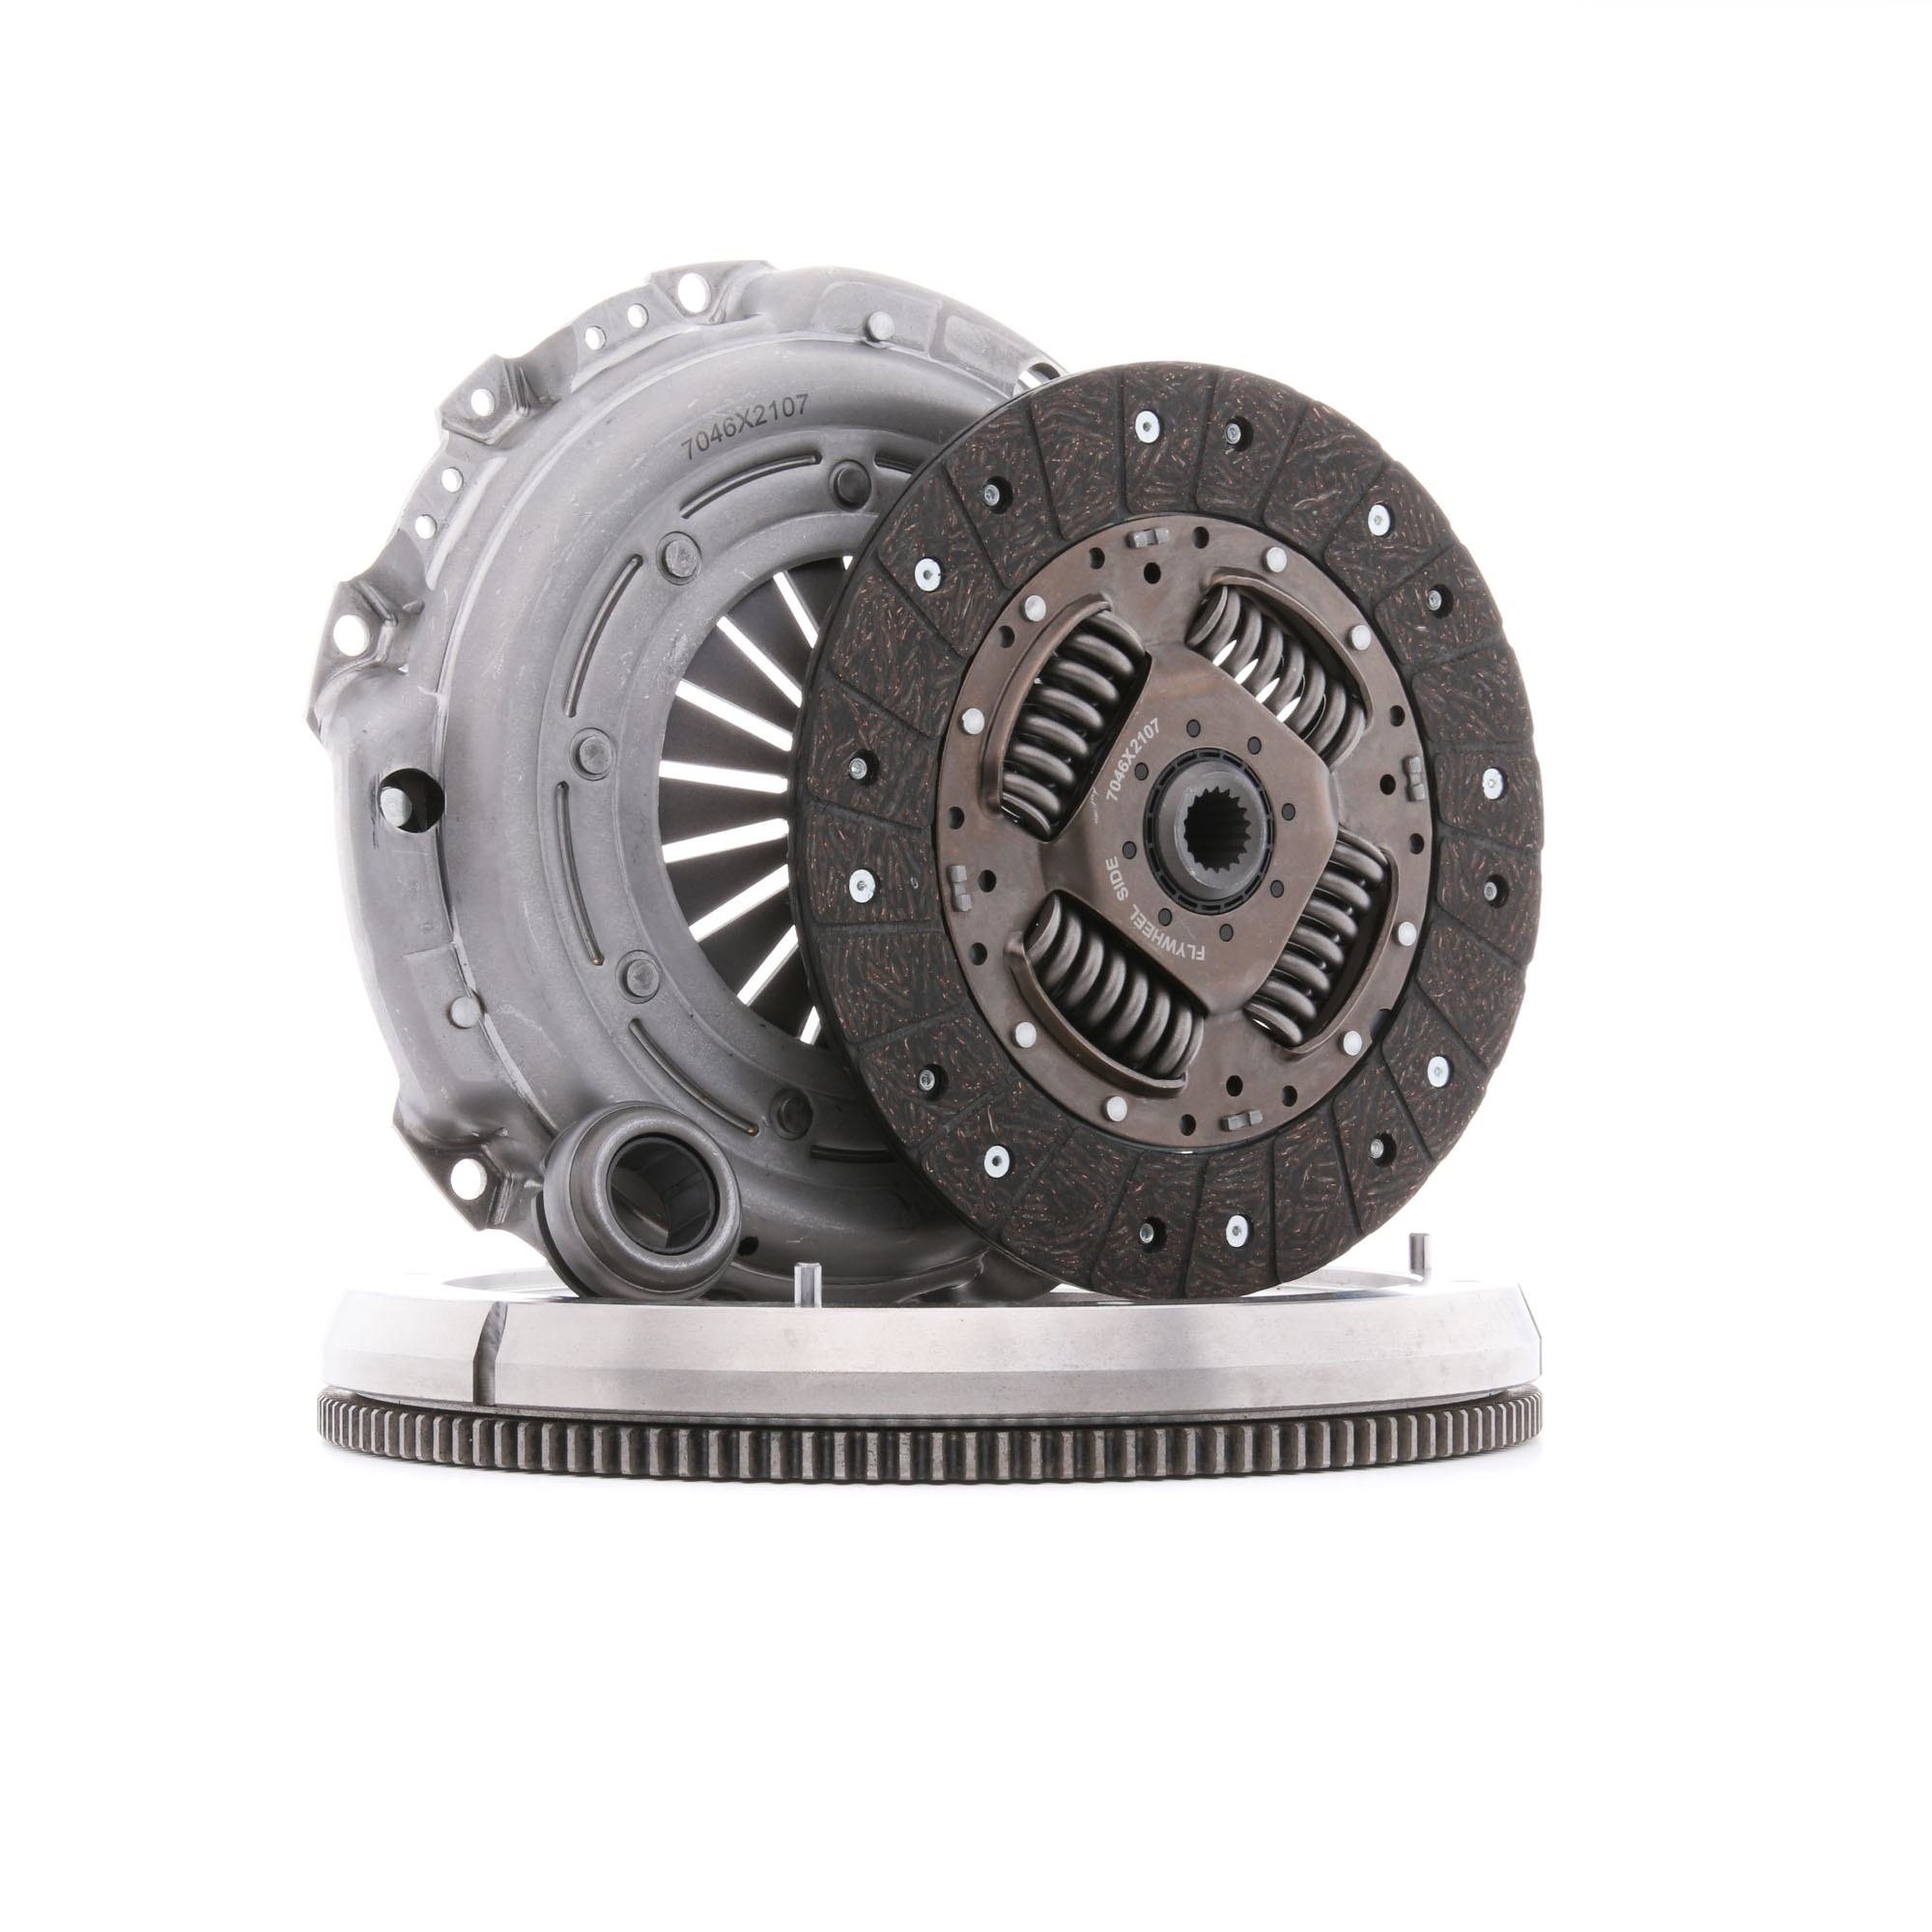 SF1046 RYMEC Clutch set CITROËN four-piece, with clutch release bearing, with flywheel, with screw set, 228mm